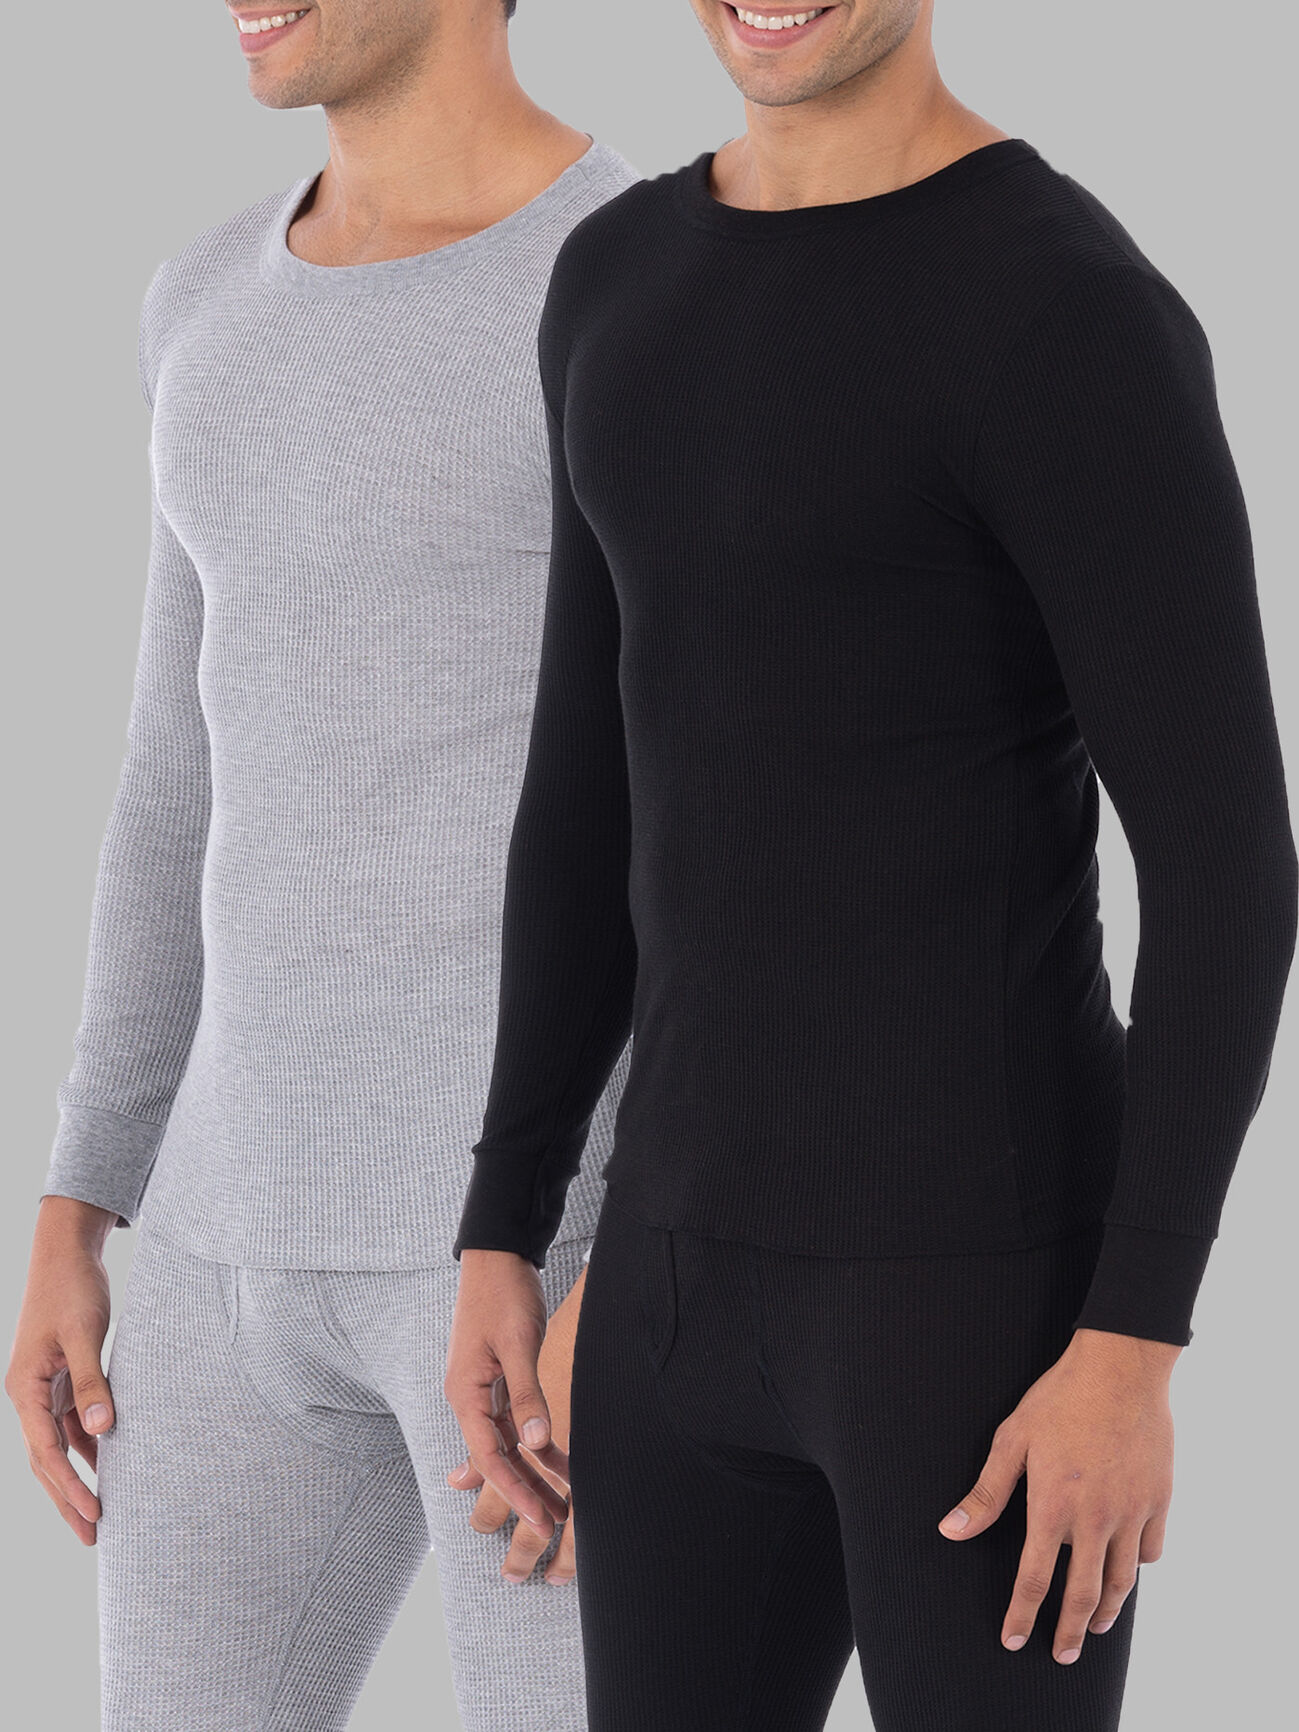 $75 Fruit Of The Loom Underwear Men's Blue Thermal Base-Layer